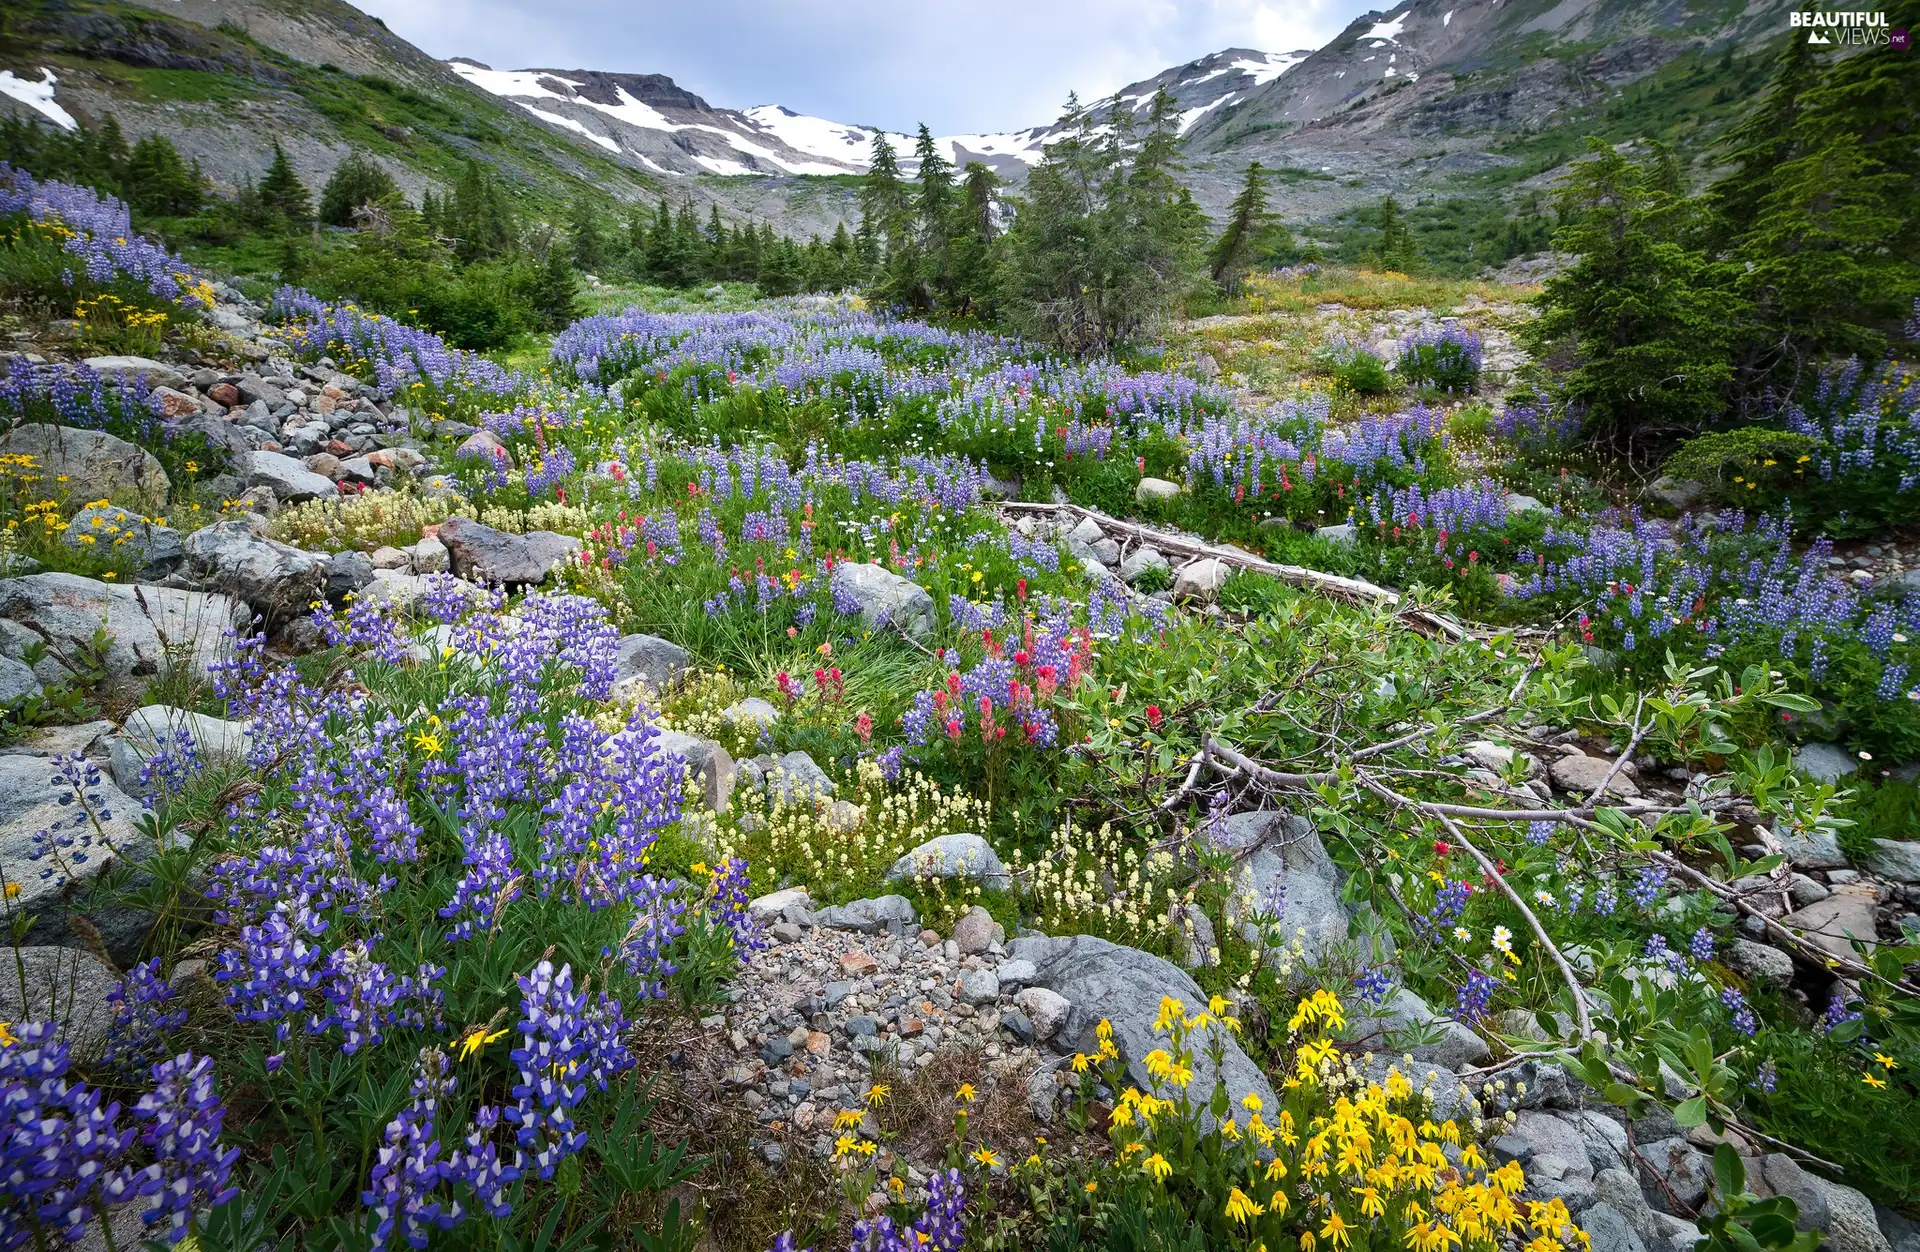 viewes, Stones, lupine, trees, Mountains, Flowers, Meadow